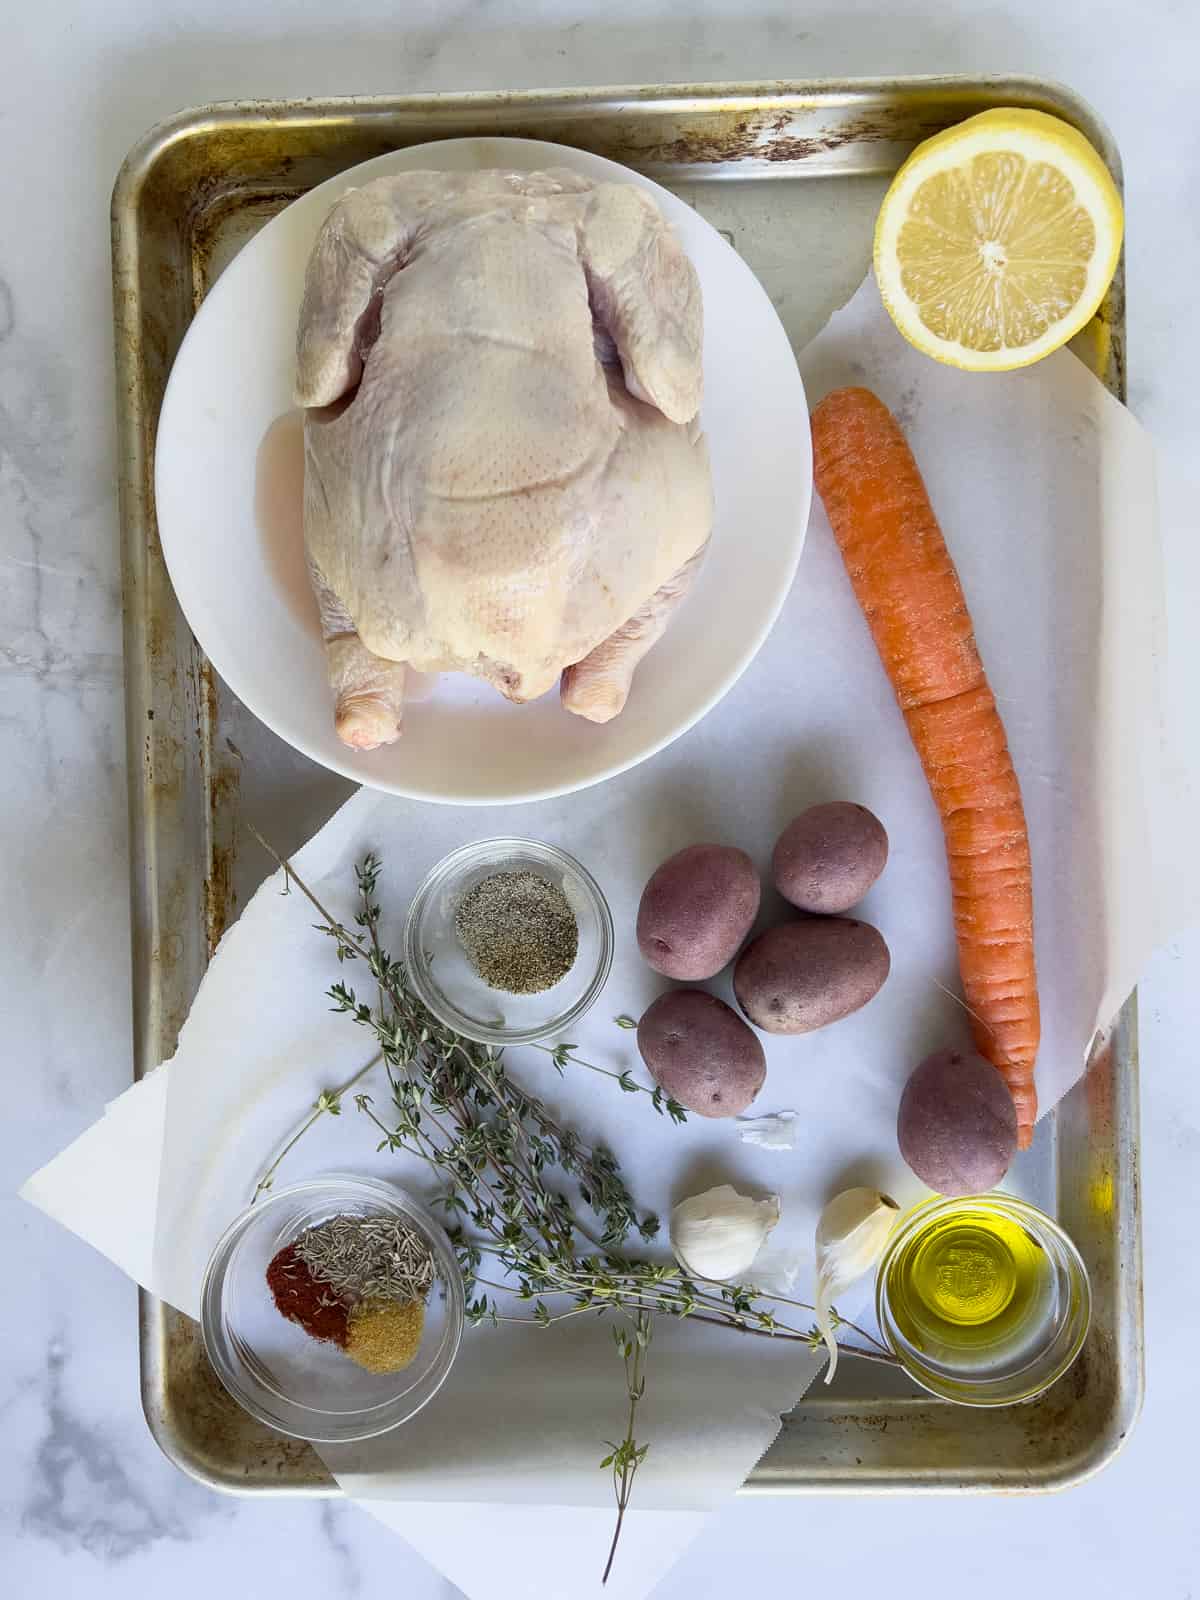 Uncooked cornish hen with herbs and spices on baking sheet.